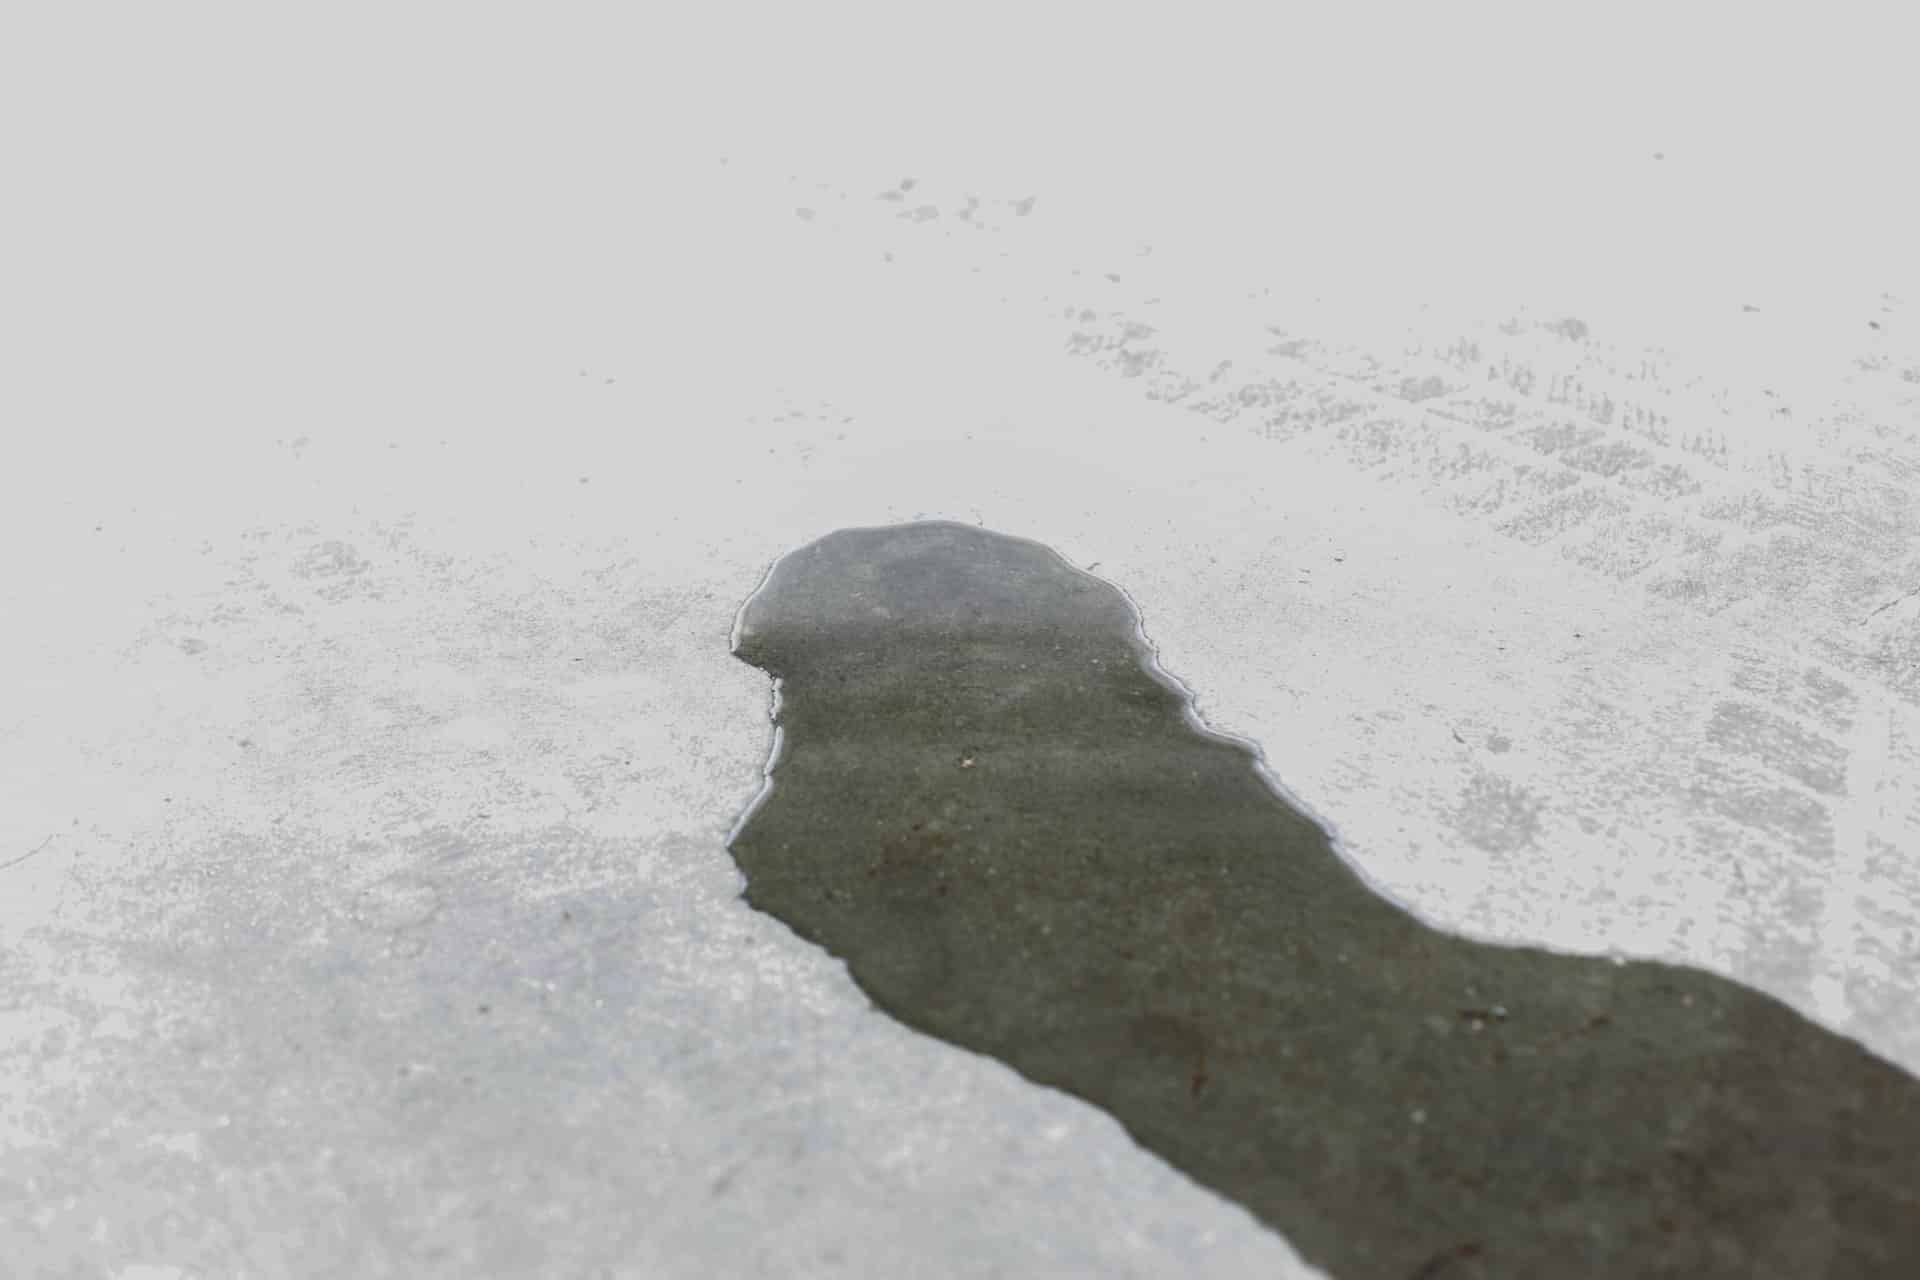 Water pooling on a concrete surface